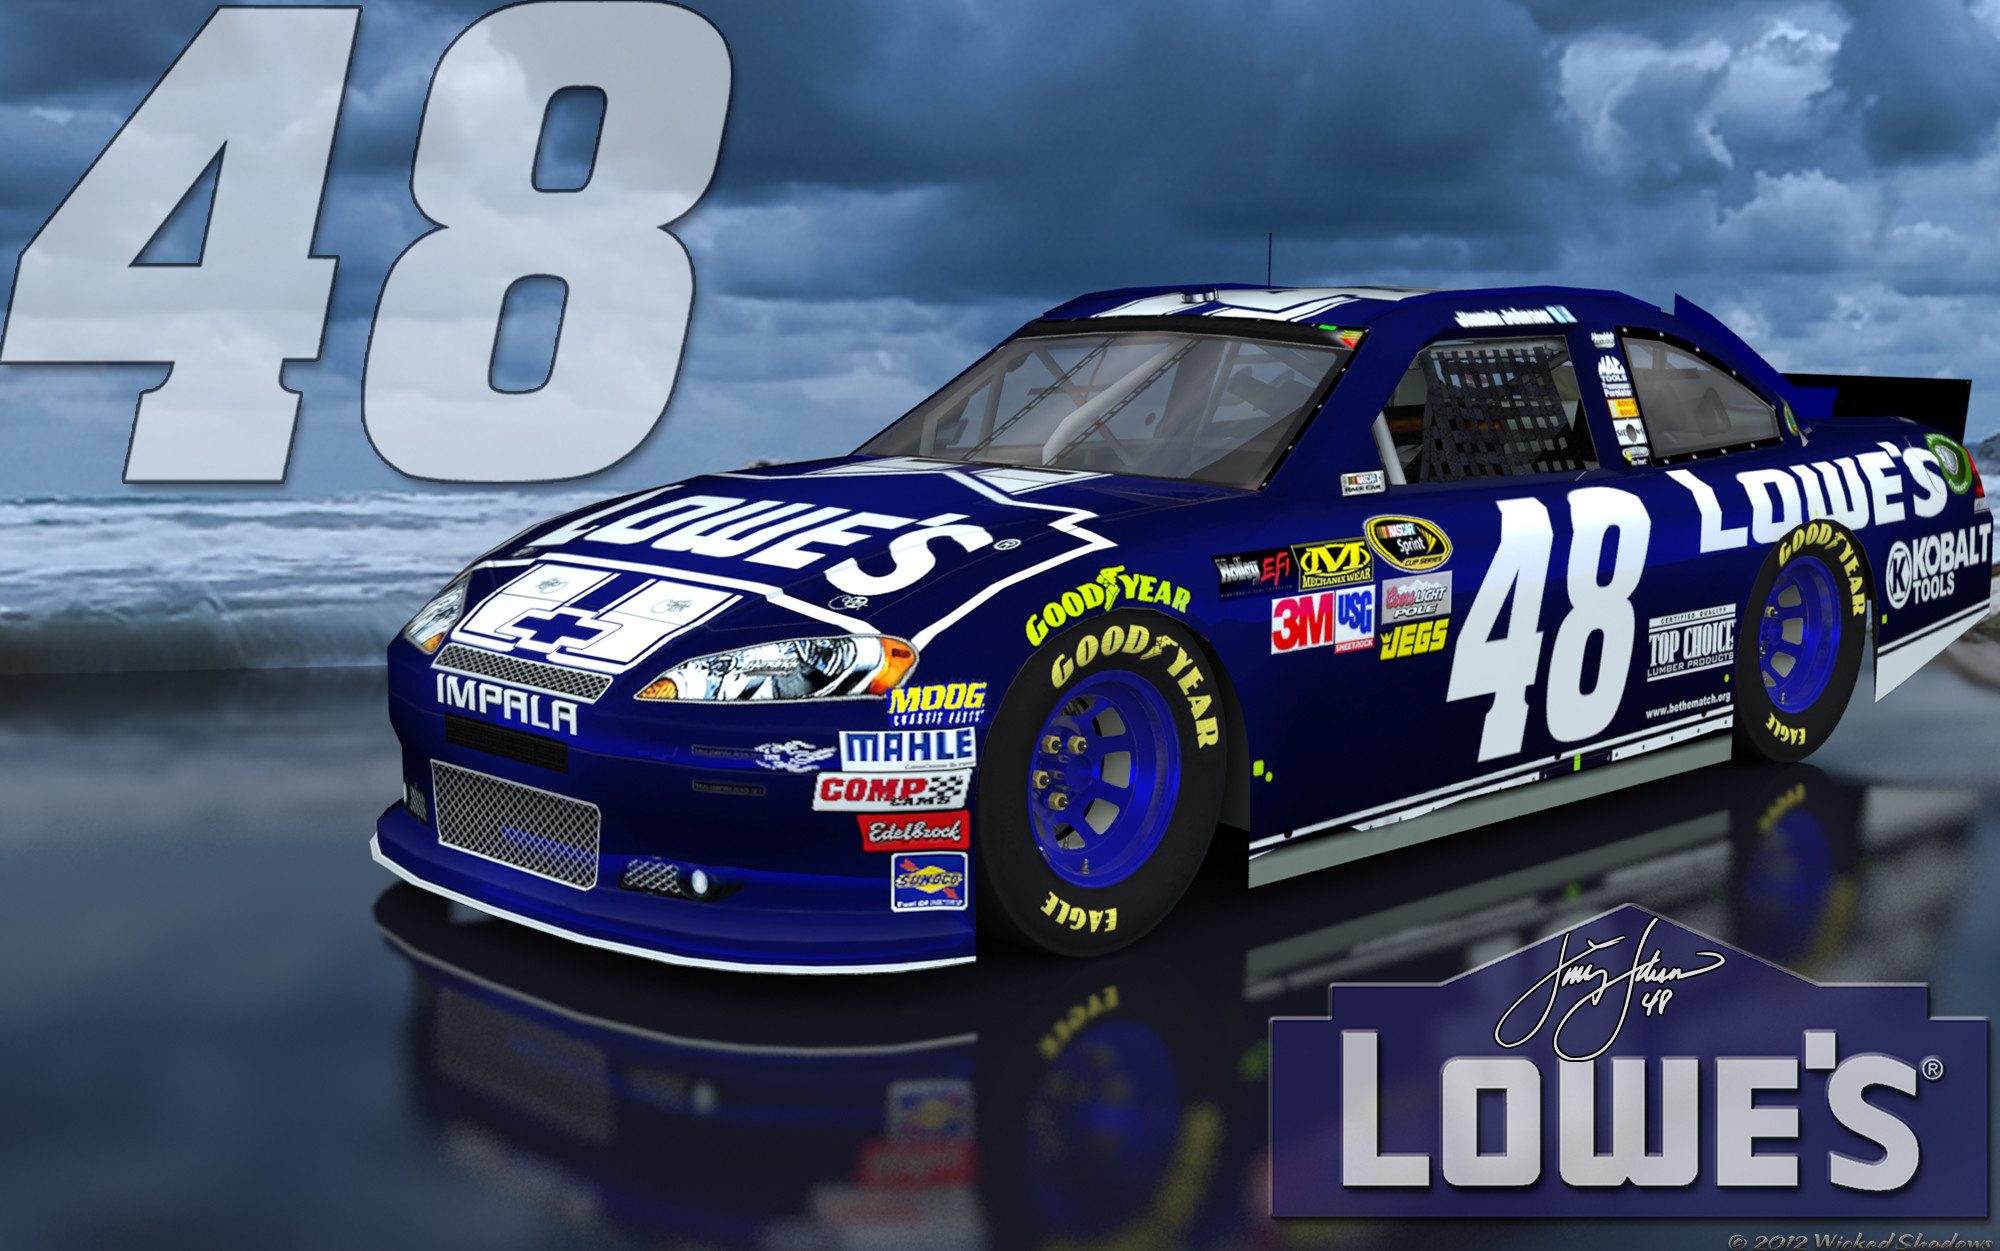 2000x1251 ... 16x10 Alt Jimmie Johnson Lowes 48 Brighter Outdoor Wallpaper ...